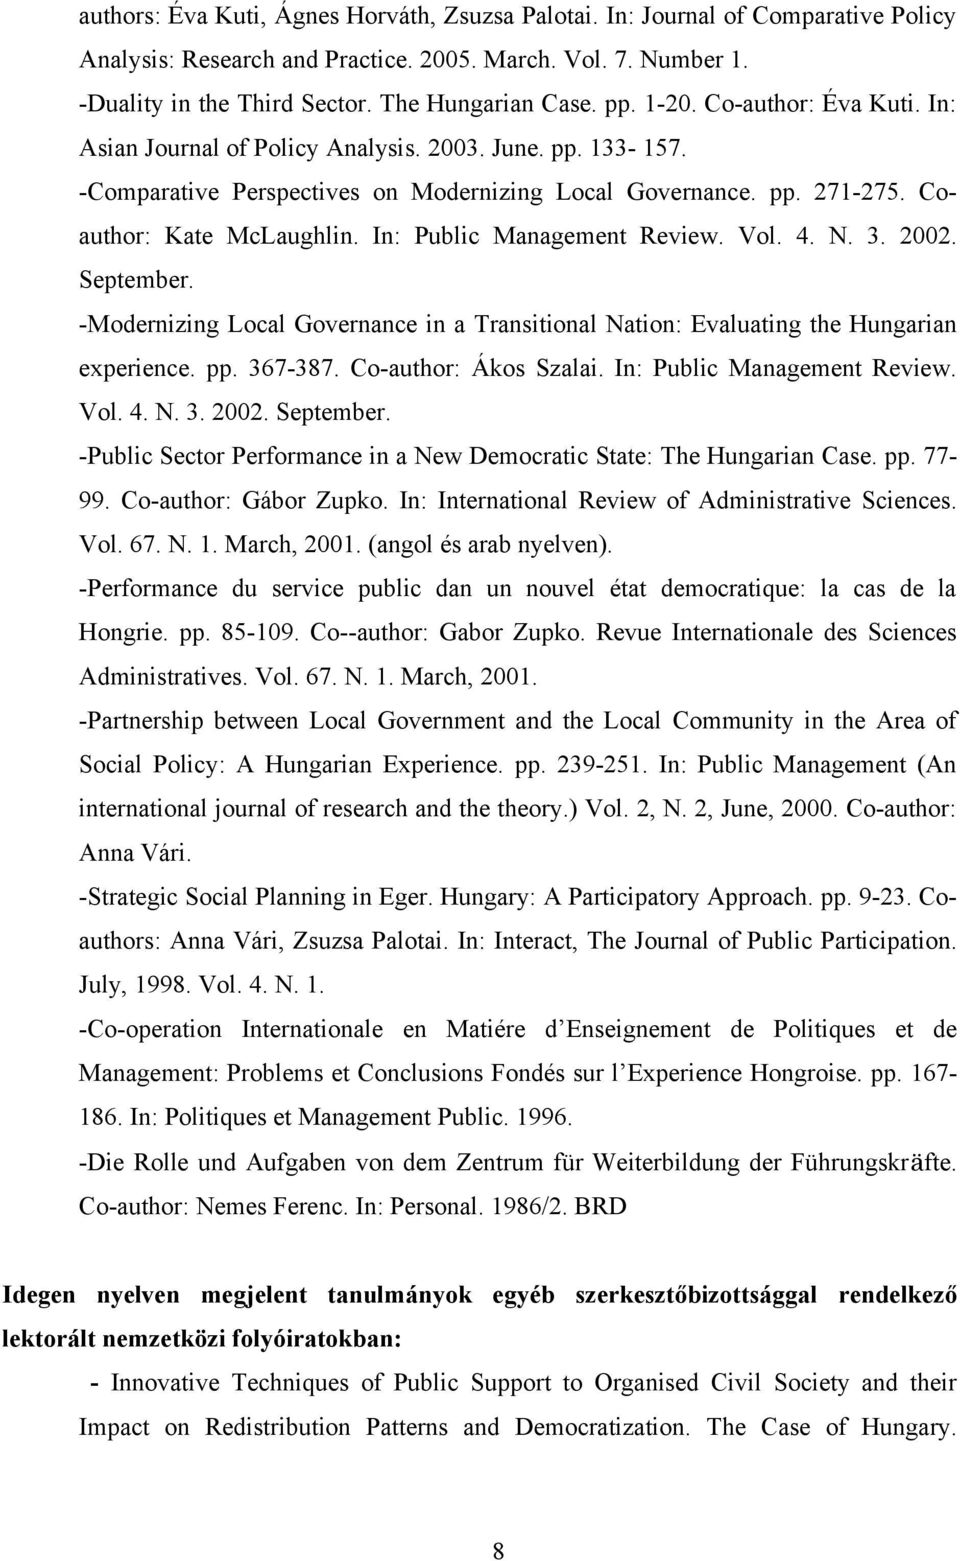 In: Public Management Review. Vol. 4. N. 3. 2002. September. -Modernizing Local Governance in a Transitional Nation: Evaluating the Hungarian experience. pp. 367-387. Co-author: Ákos Szalai.